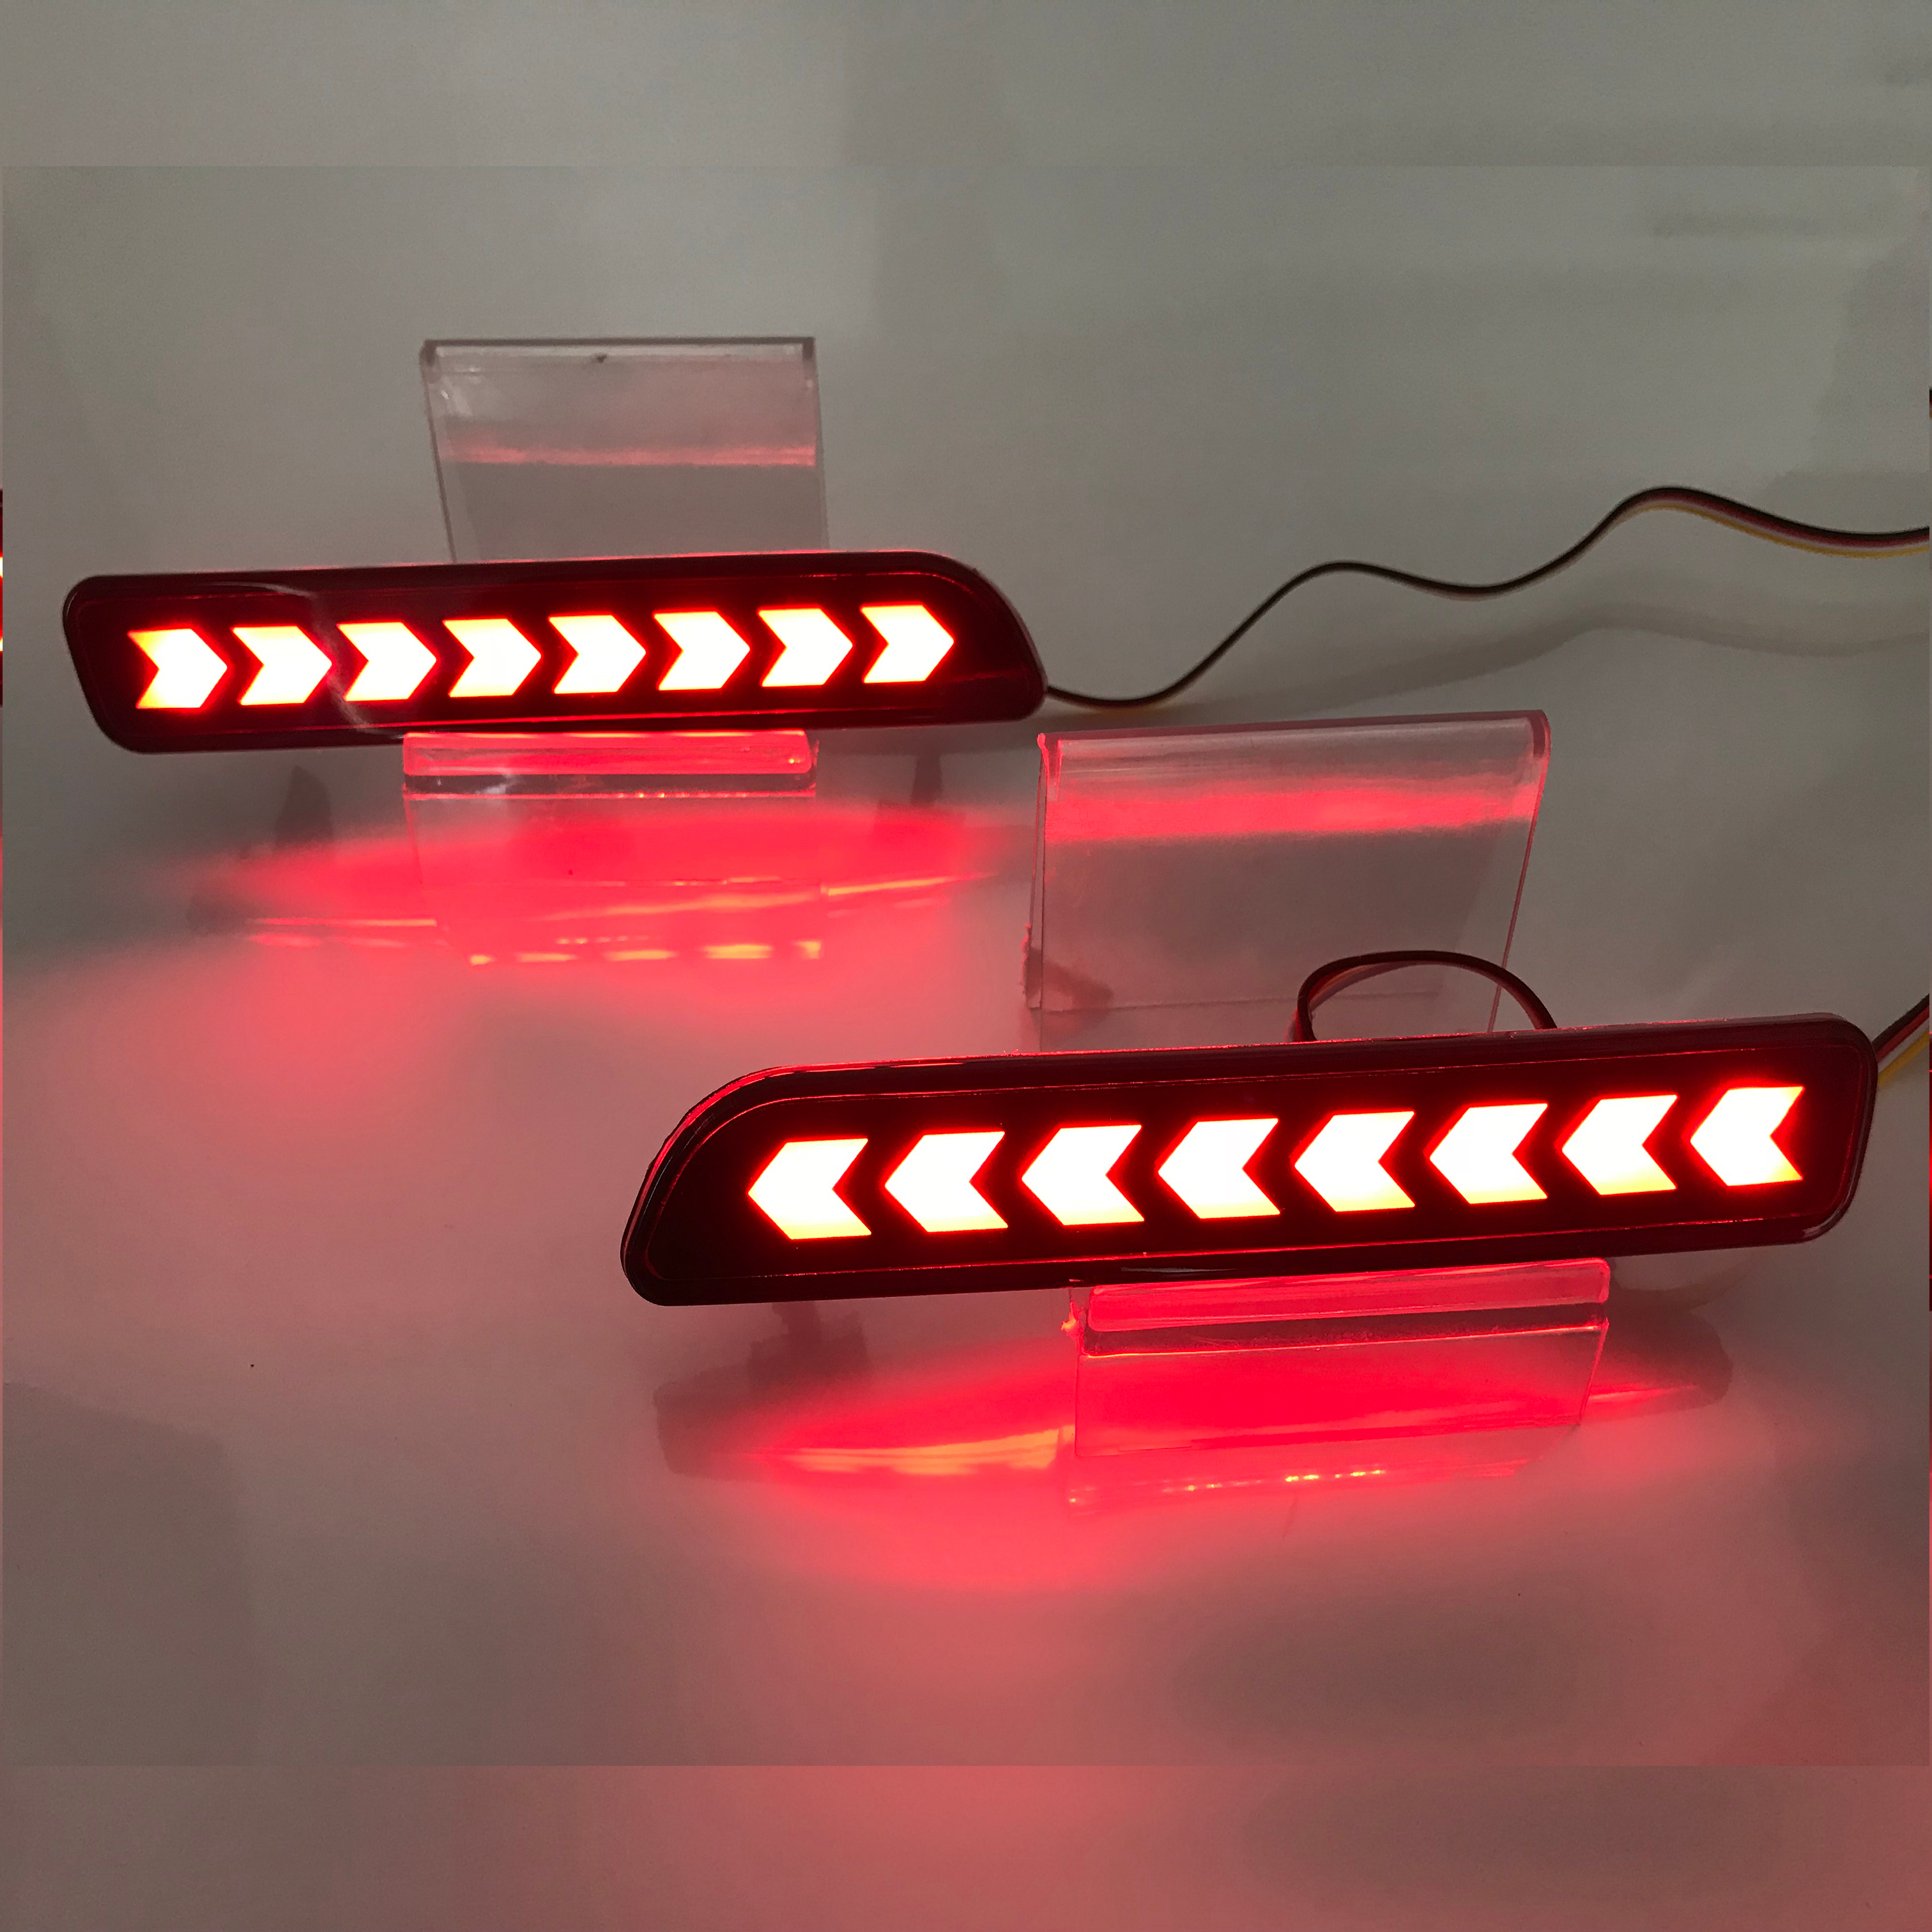 New 5 types of Tail Lamp Reflector for SUZUK| VITARA/ new products new views